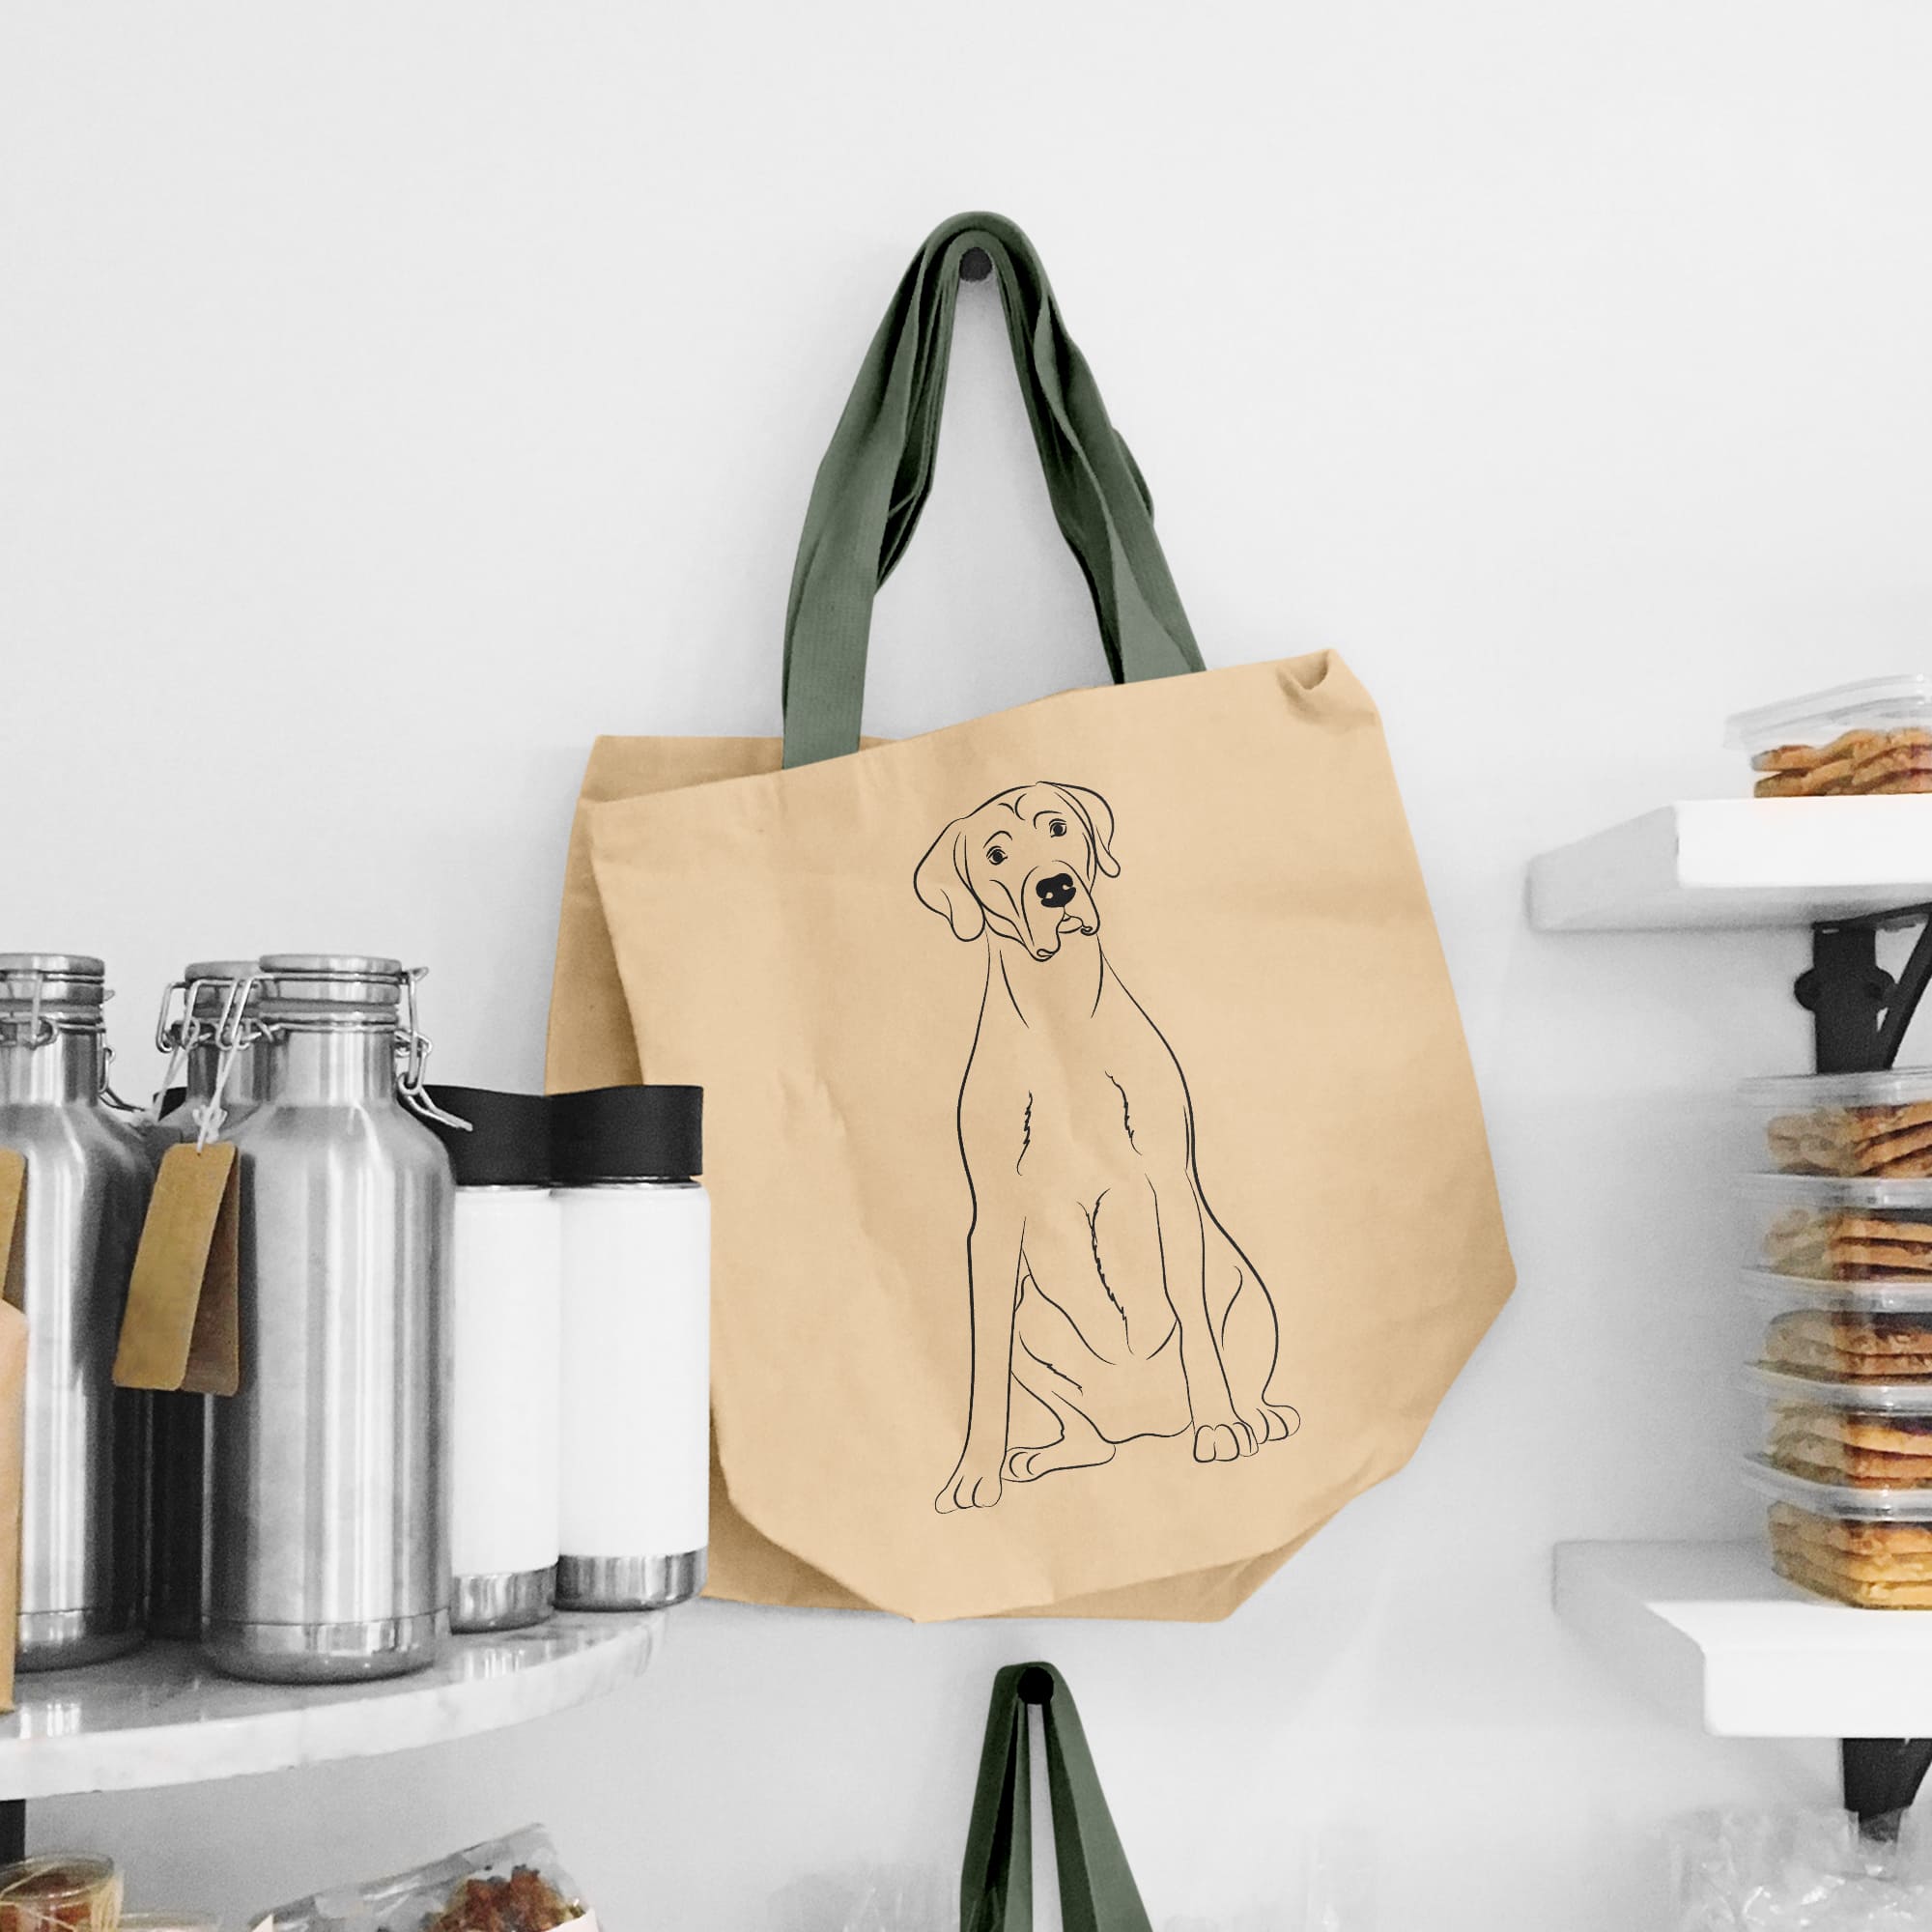 Brown paper bag with a drawing of a dog on it.